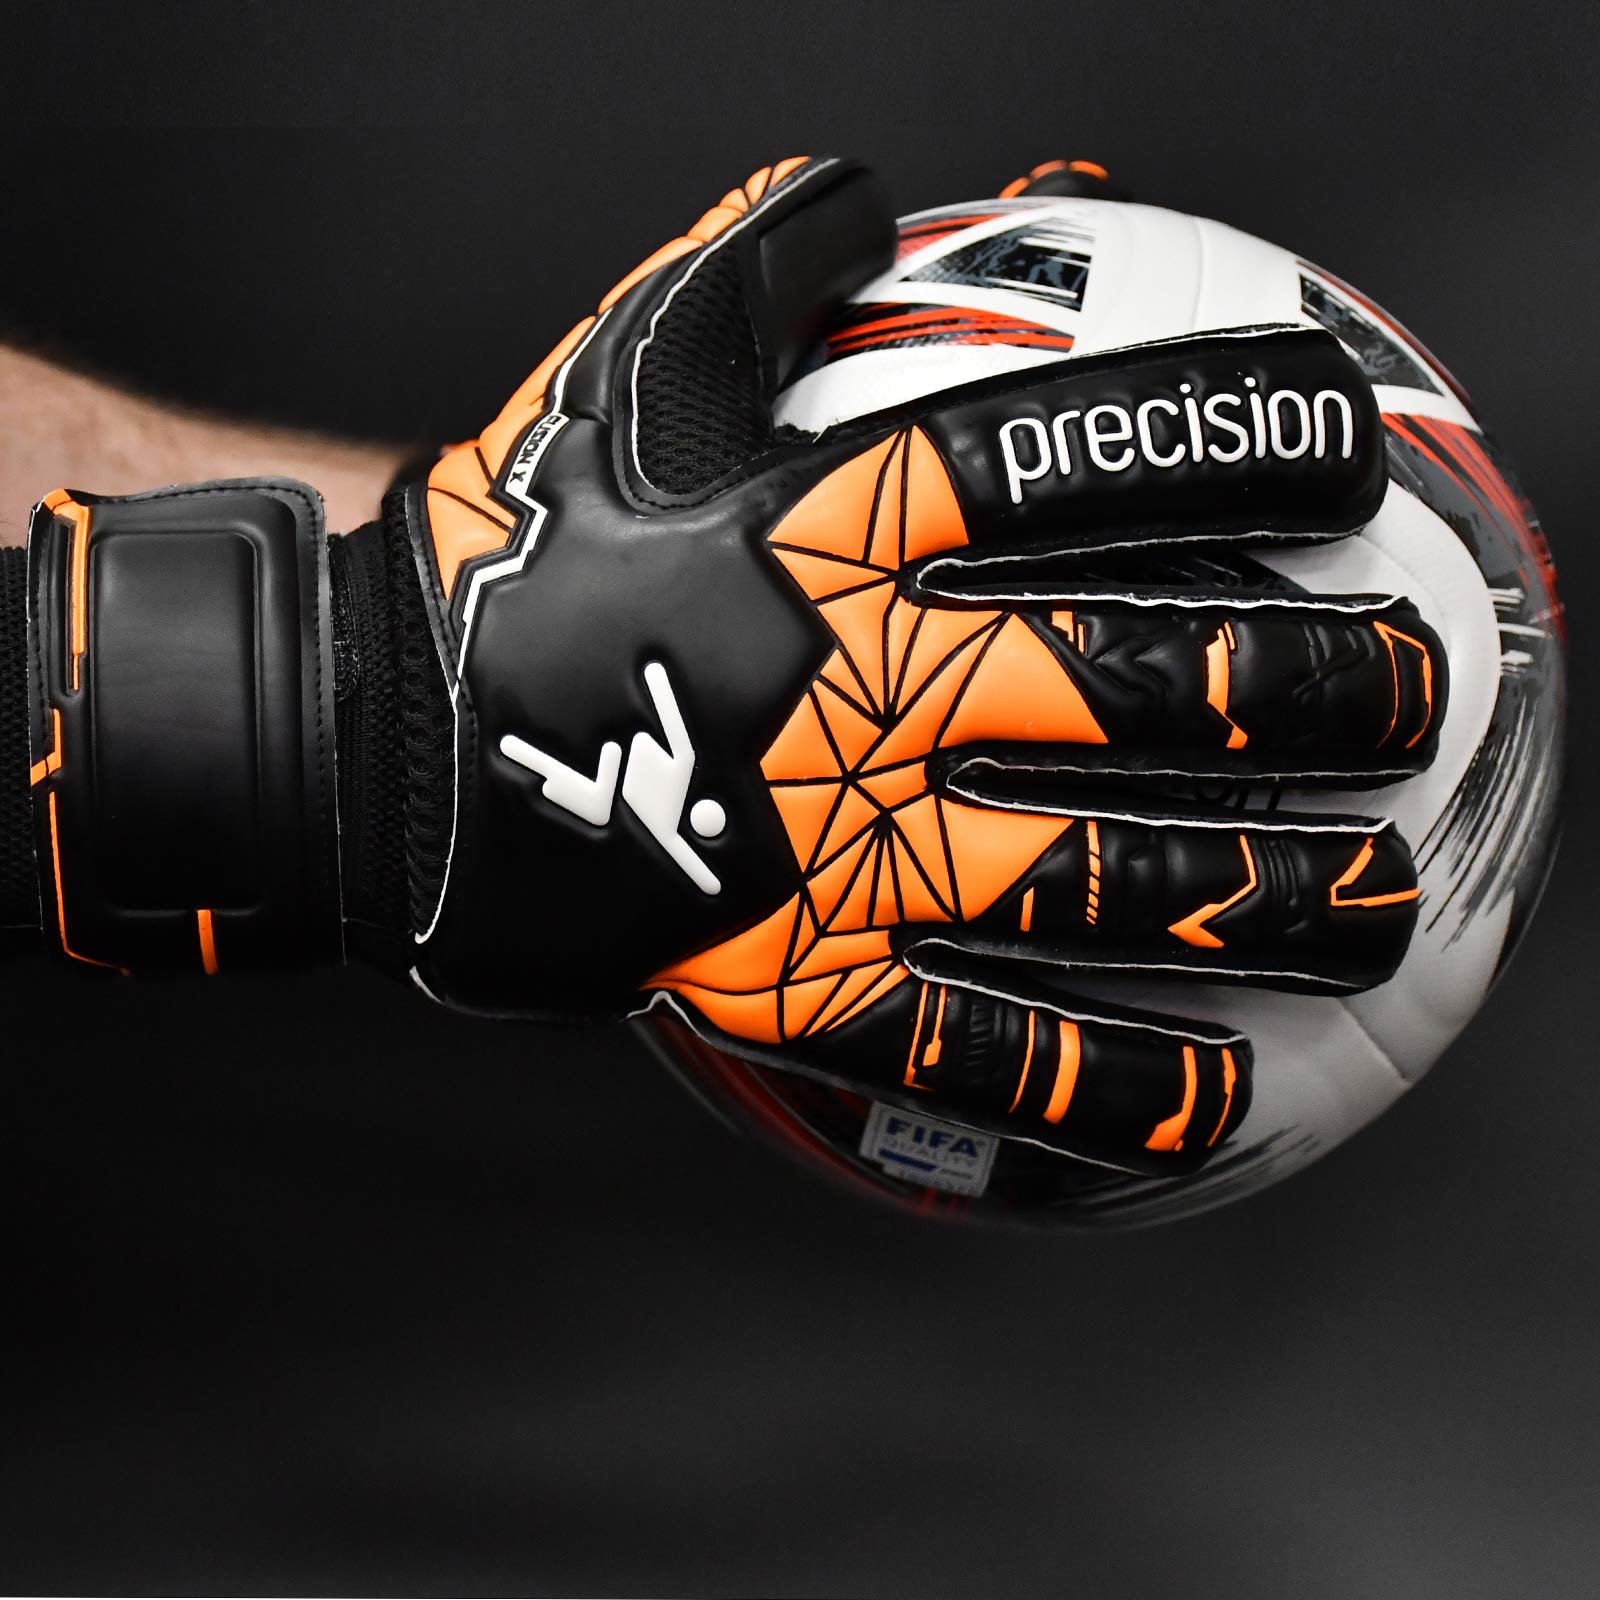 PRECISION FUSION X ROLL FINGER PROTECT KIDS GOALKEEPER GLOVES